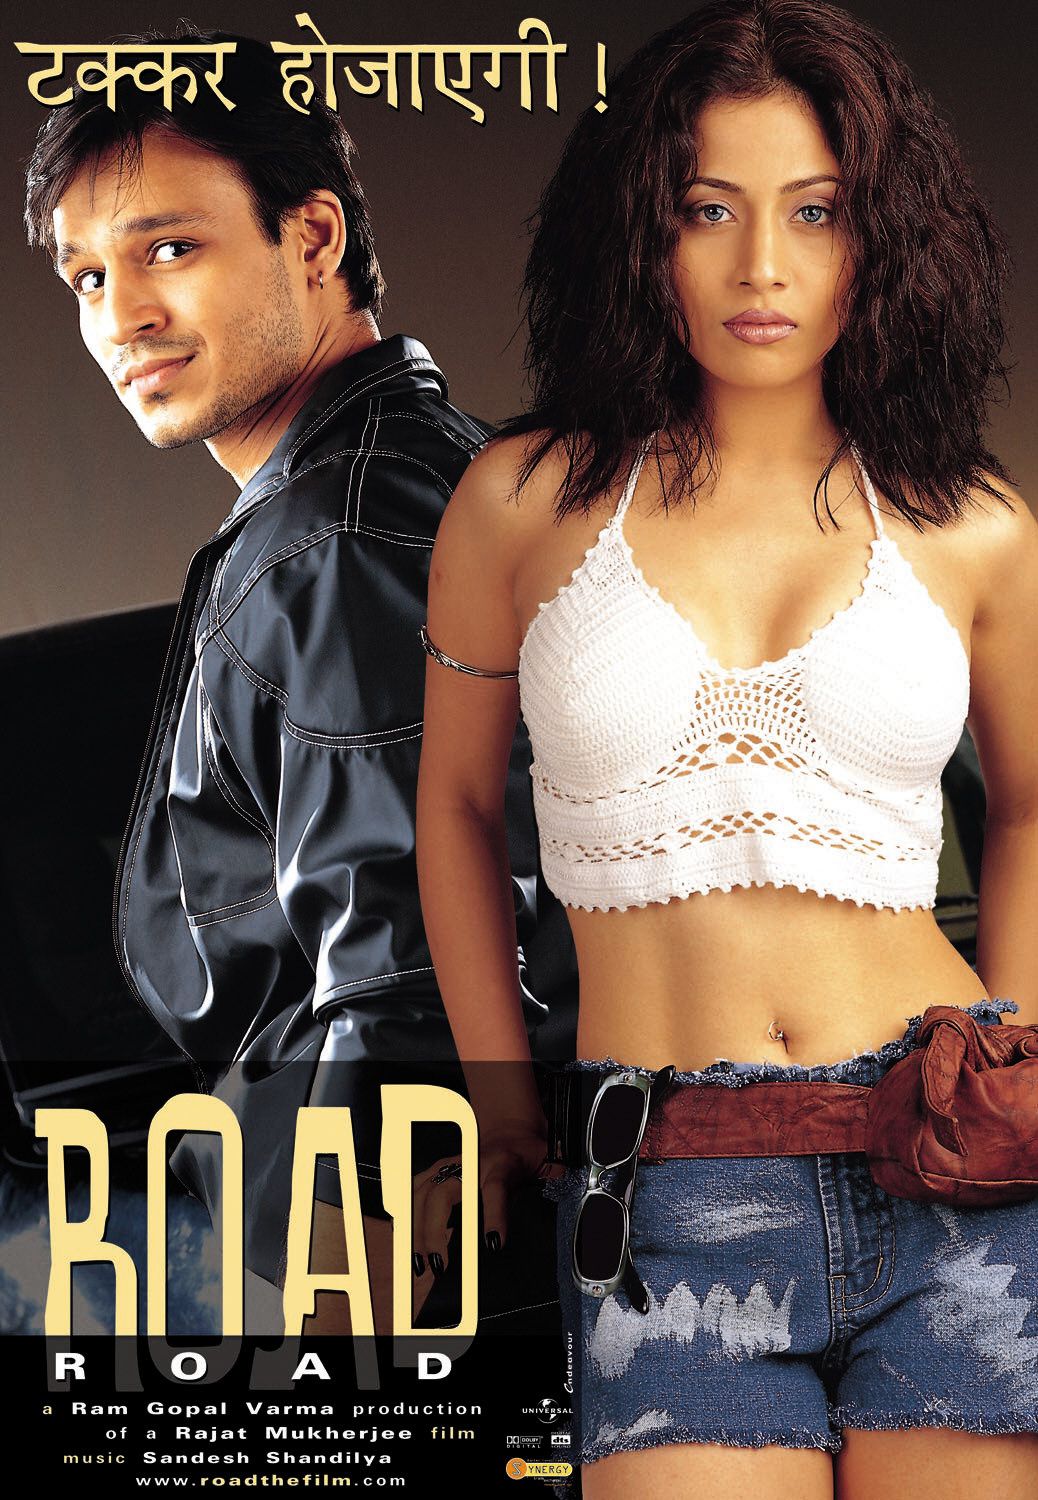 Extra Large Movie Poster Image for Road (#5 of 7)